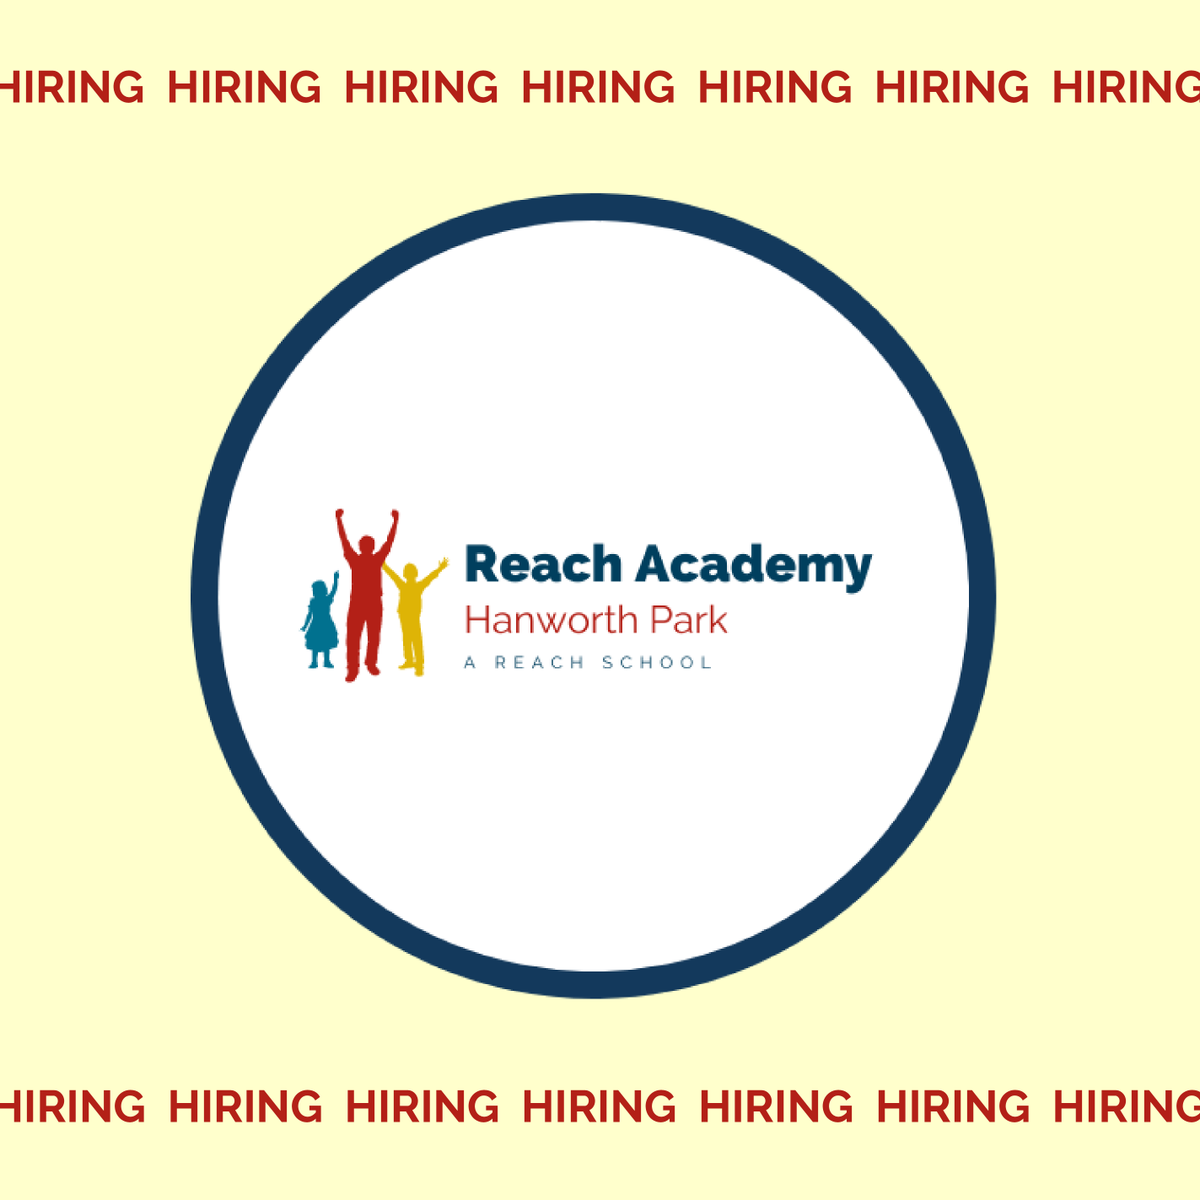 New year, new school! ✨️ As the new year fast approaches, we want to remind you that Reach Academy Hanworth Park is welcoming a founding team. 

🔗reachacademyhanworthpark.com/join-us 

#professionaldevelopment #UKteachers